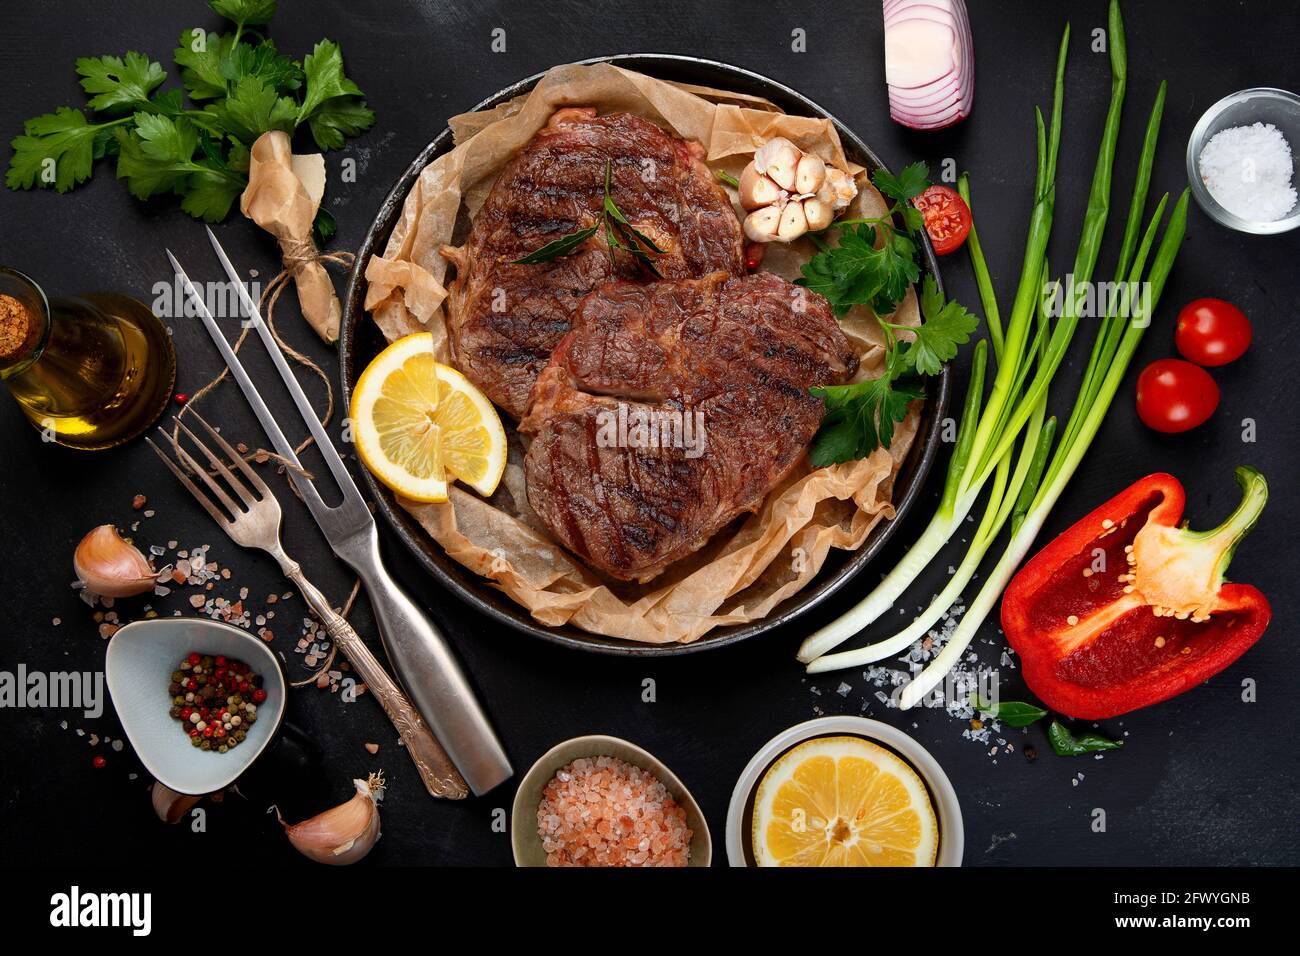 Delicious prepared meat steaks with seasoning and herbs on dark background. Geilled food concept. Top view Stock Photo